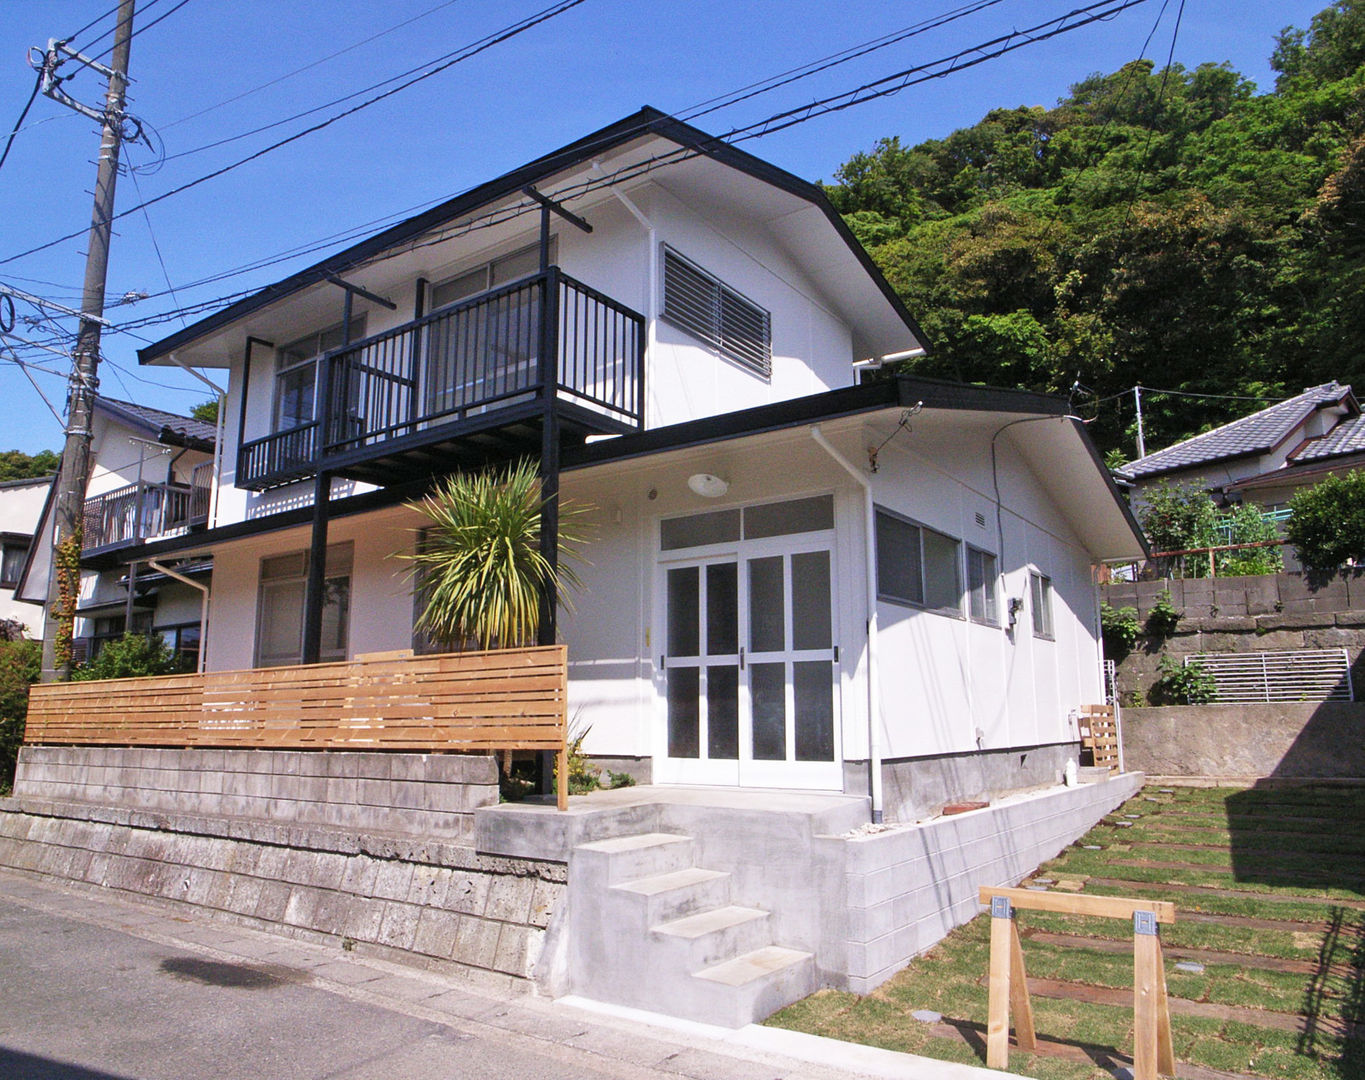 「stri-ep house 秋谷2丁目」, vibe design inc. vibe design inc. Eclectic style houses